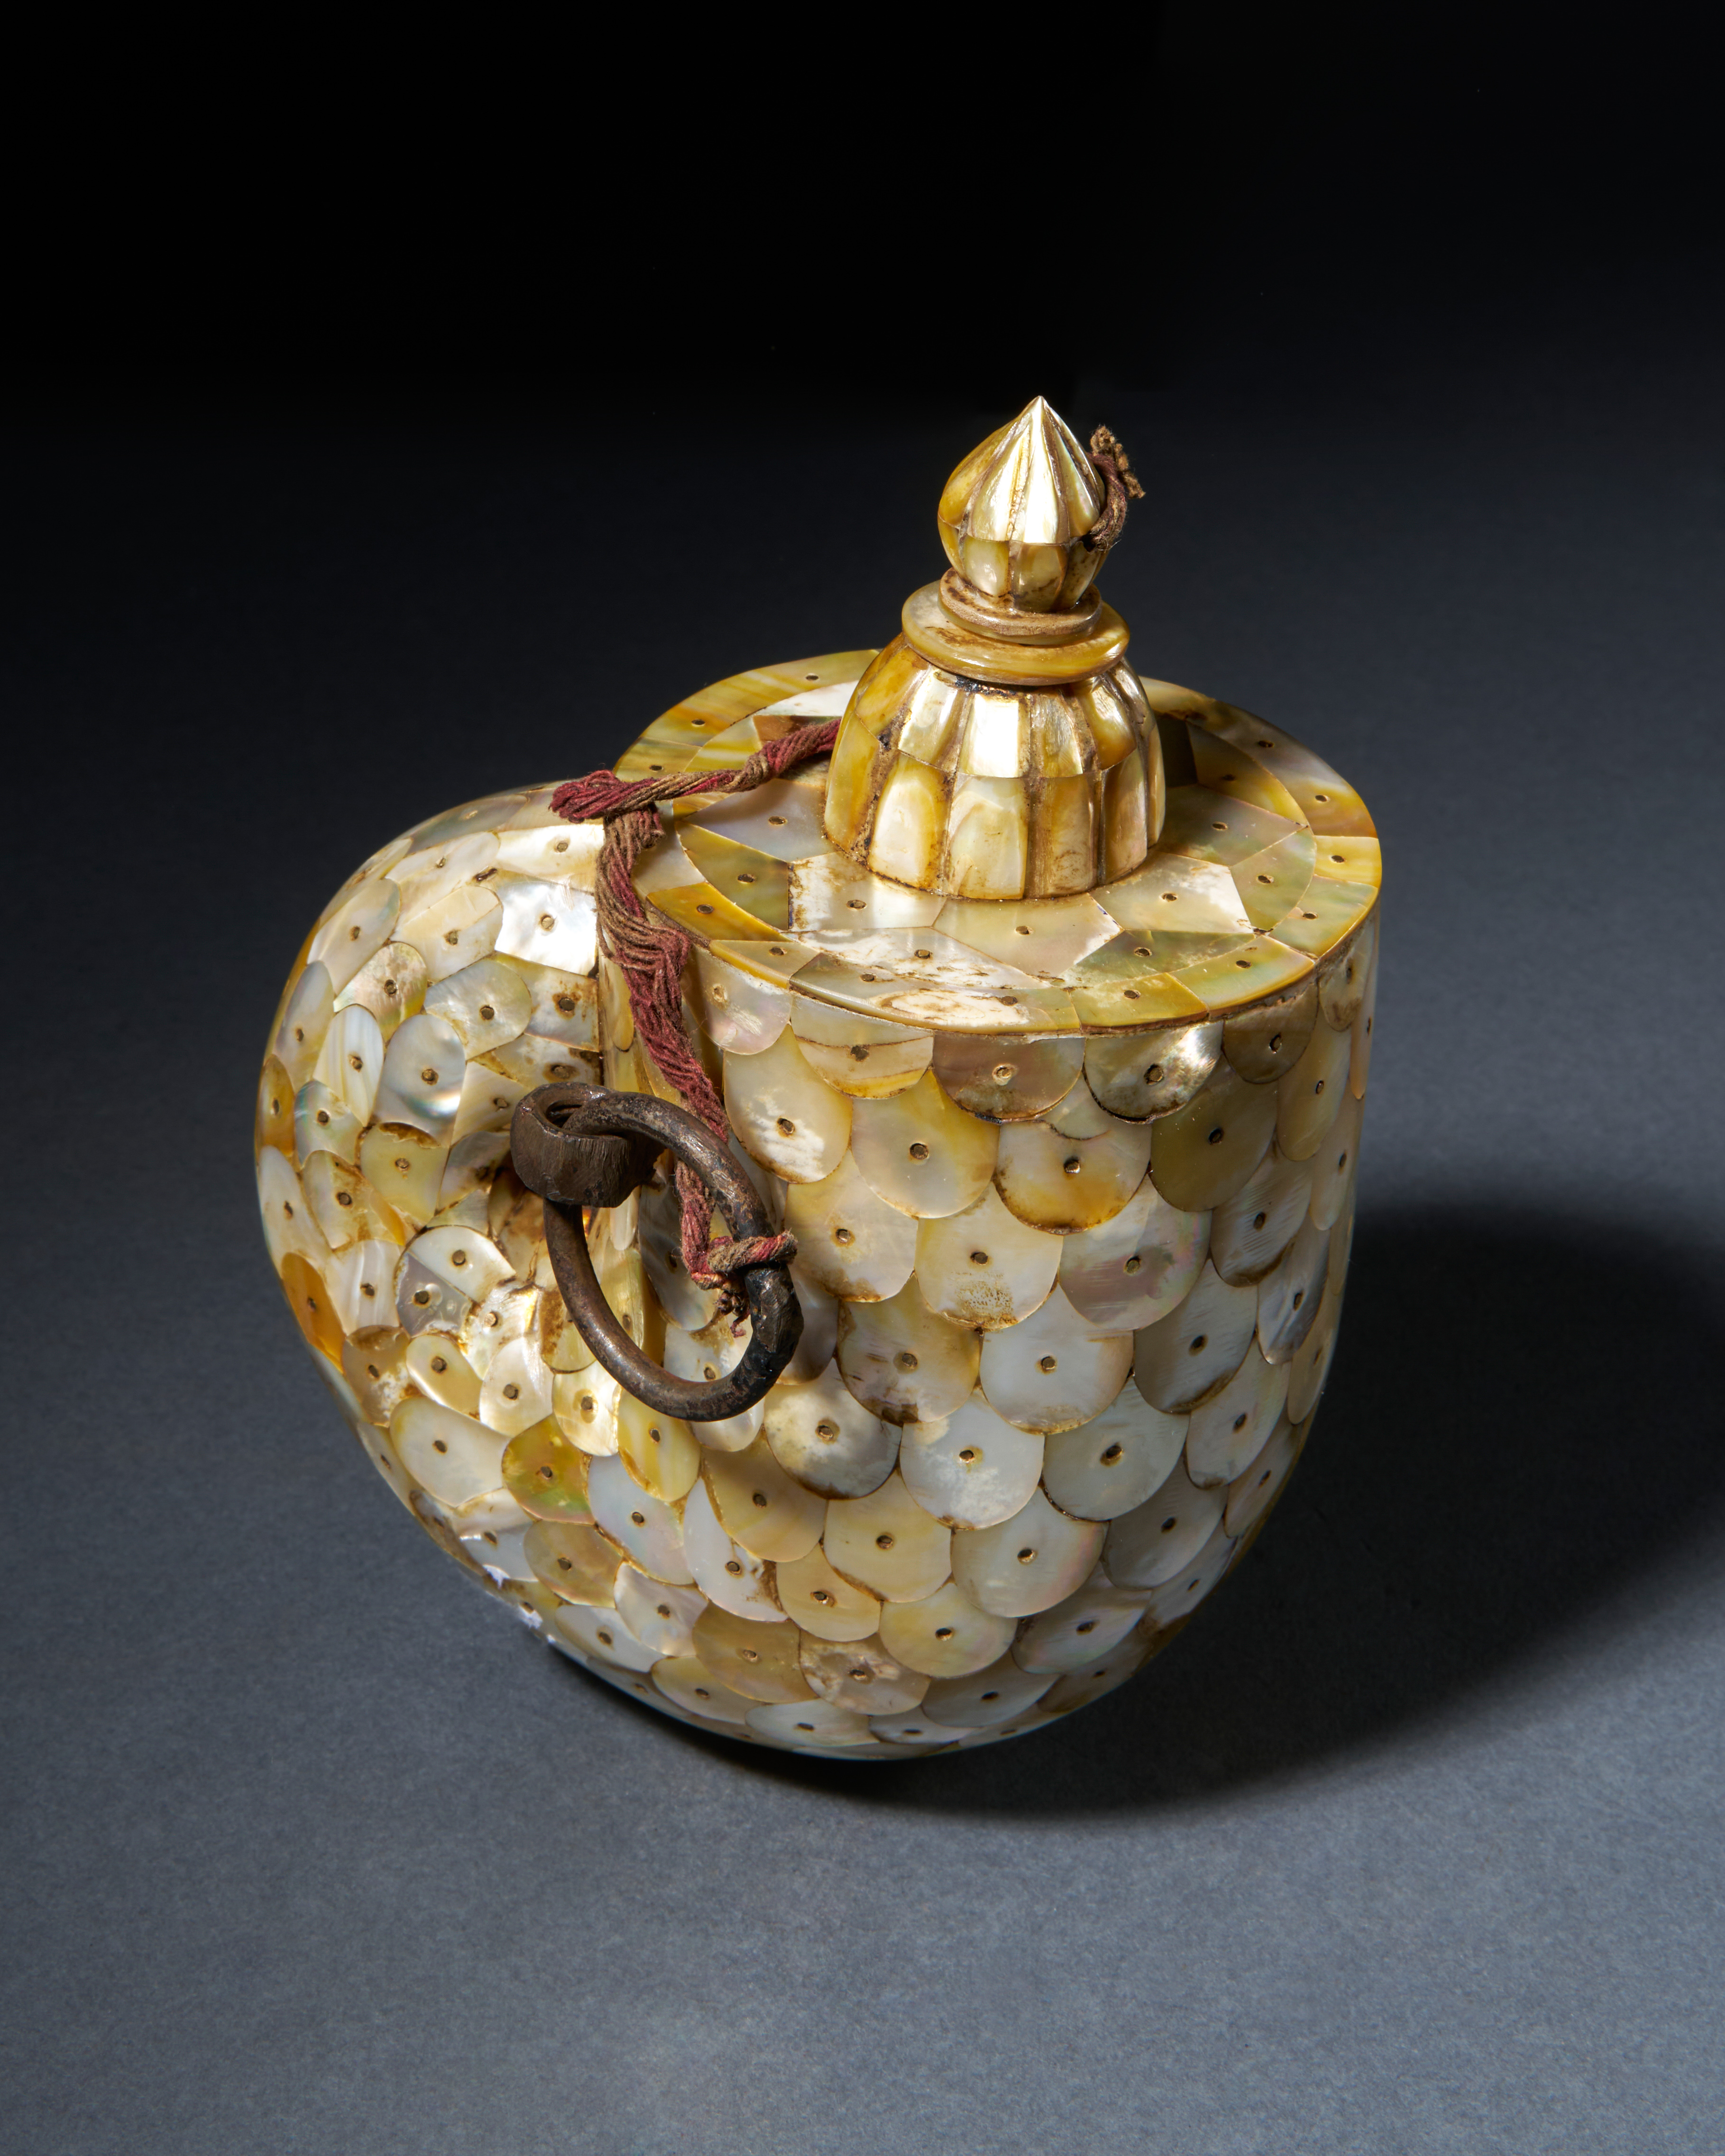 A MOTHER OF PEARL GOA POWDER FLASK, GUJARAT, WESTERN INDIA, 18TH/19TH CENTURY - Image 2 of 3